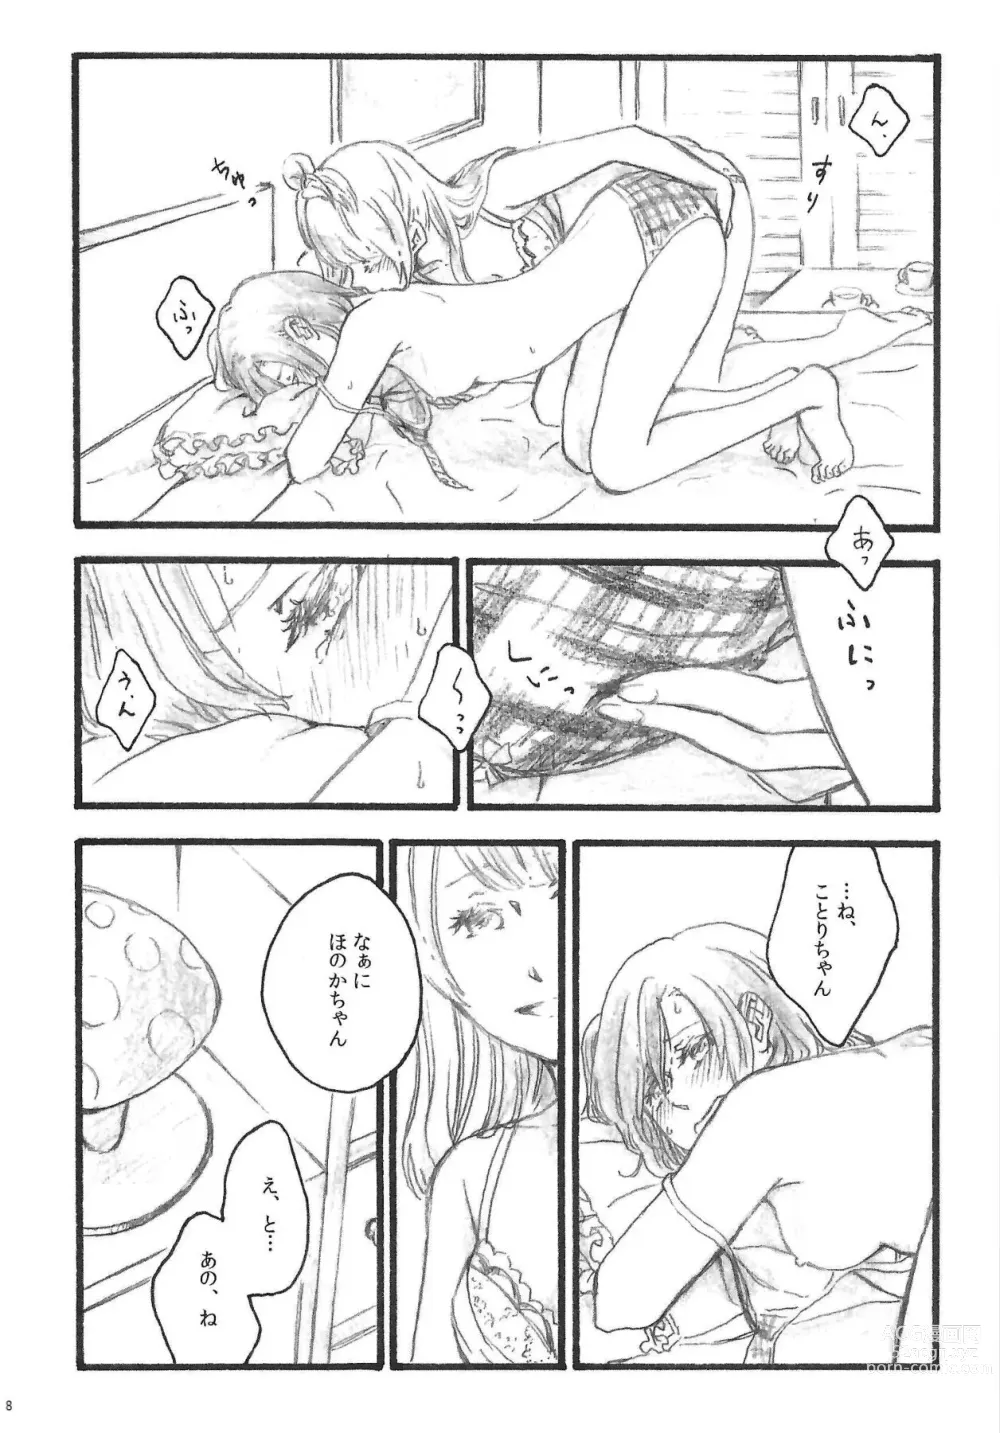 Page 7 of doujinshi a little more